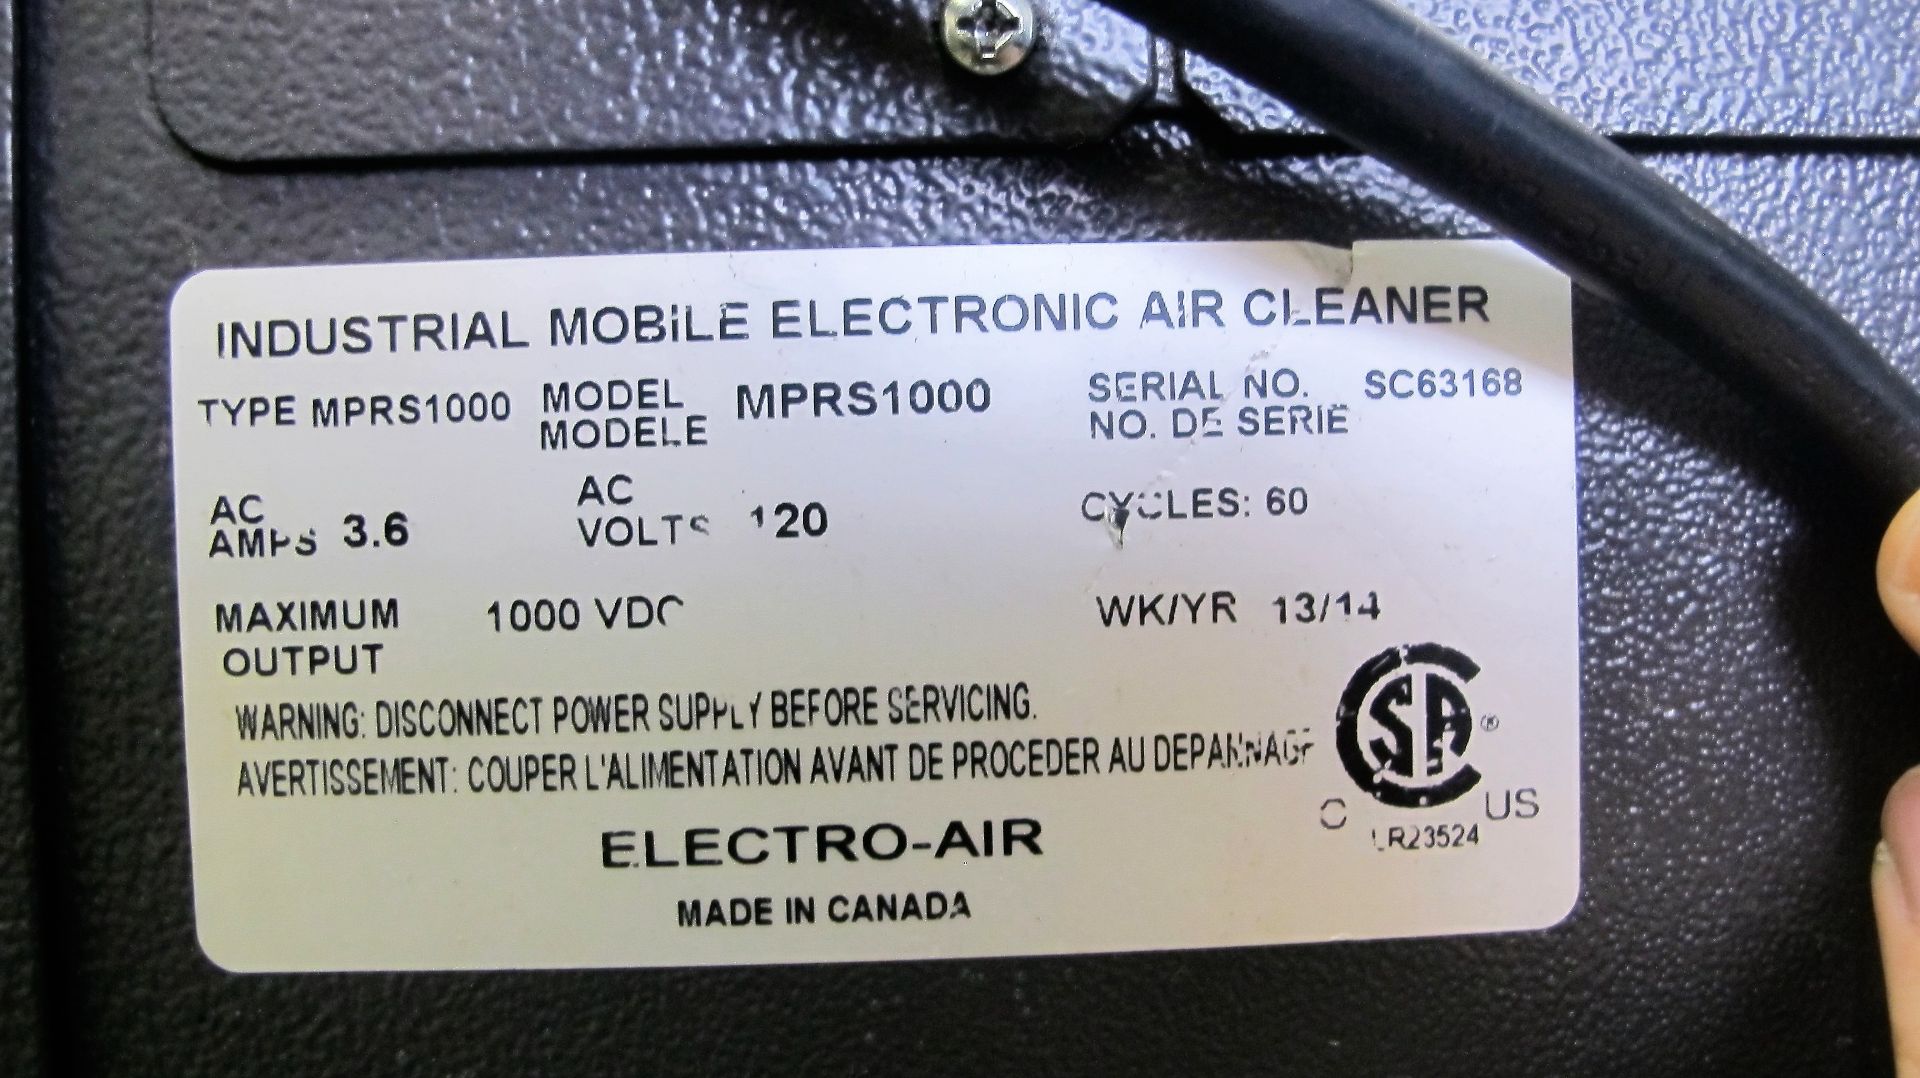 2014 ELECTRO-AIR MPRS1000 PORTABLE FUME EXTRACTOR, S/N SC63168 - Image 4 of 4